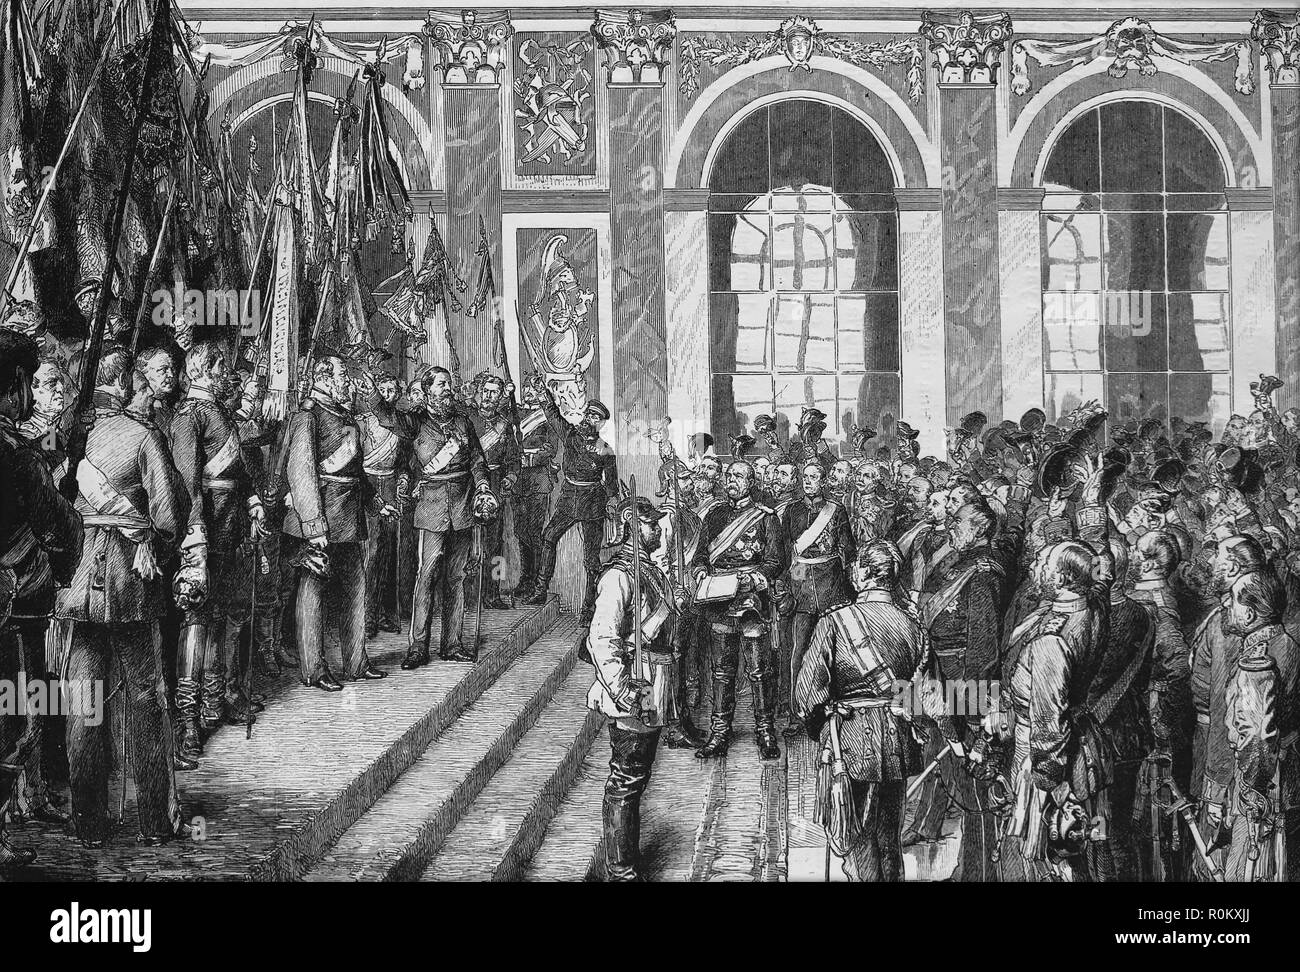 Unification of Germany. Proclamation of the German Empire. 8 January 1871. Hall of Mirrors, Palace of Versailles, France. Stock Photo